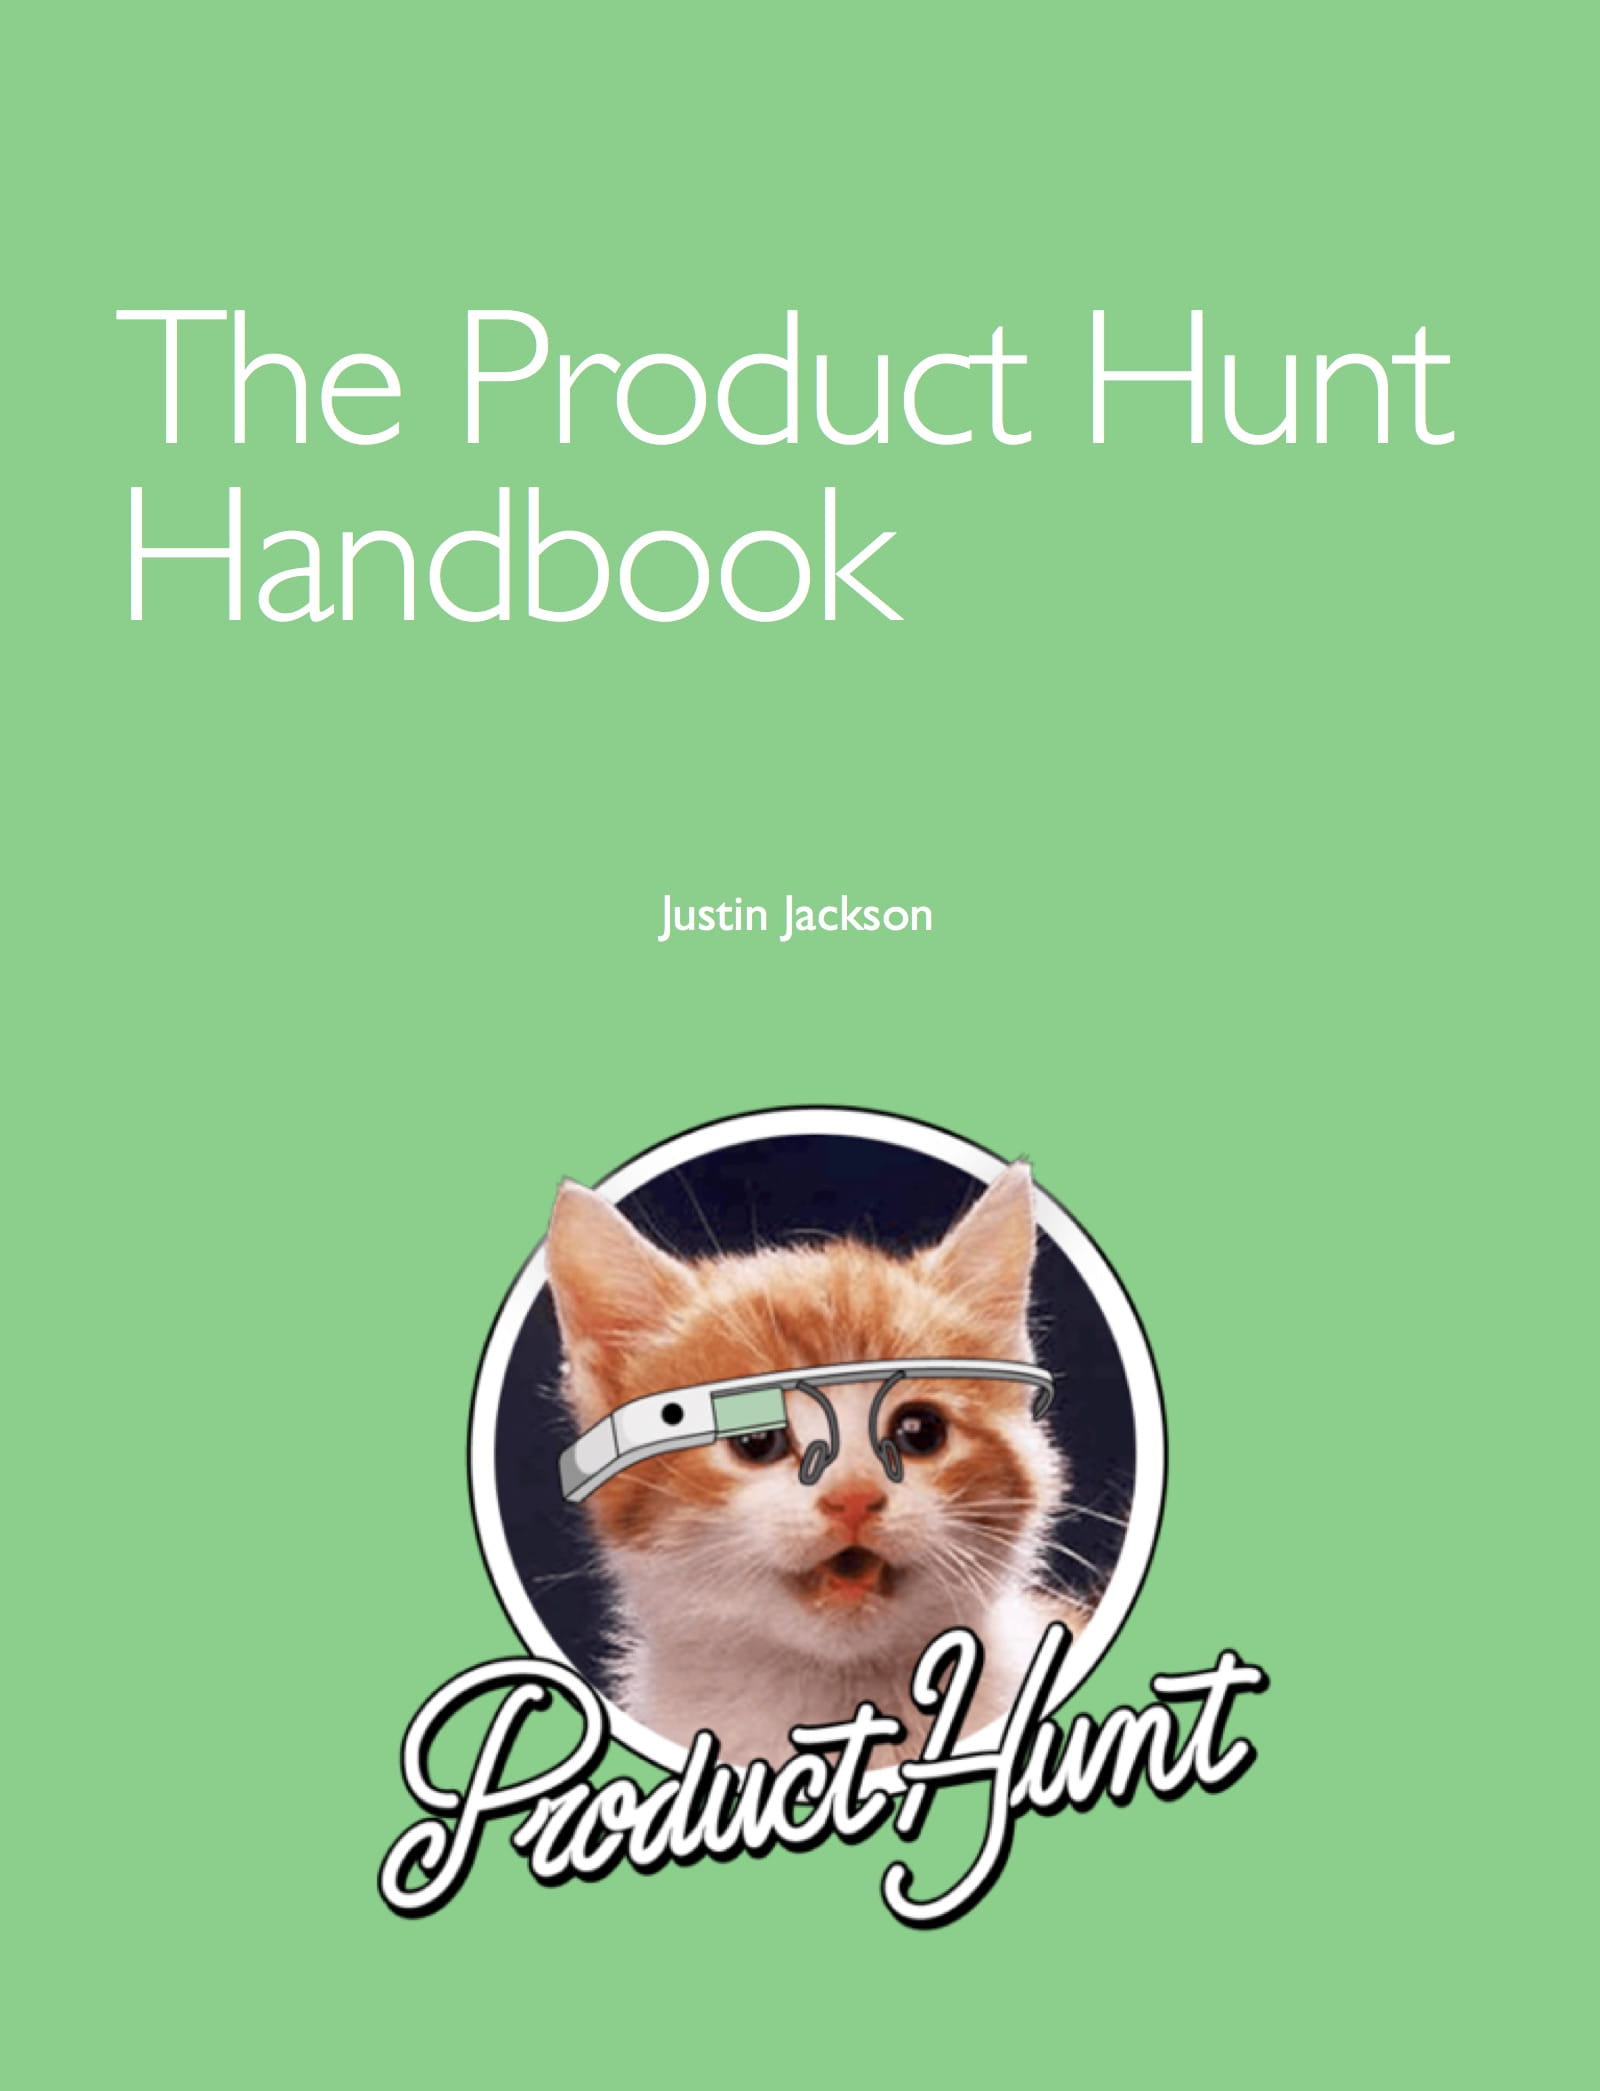 The Product Hunt Handbook by Justin Jackson